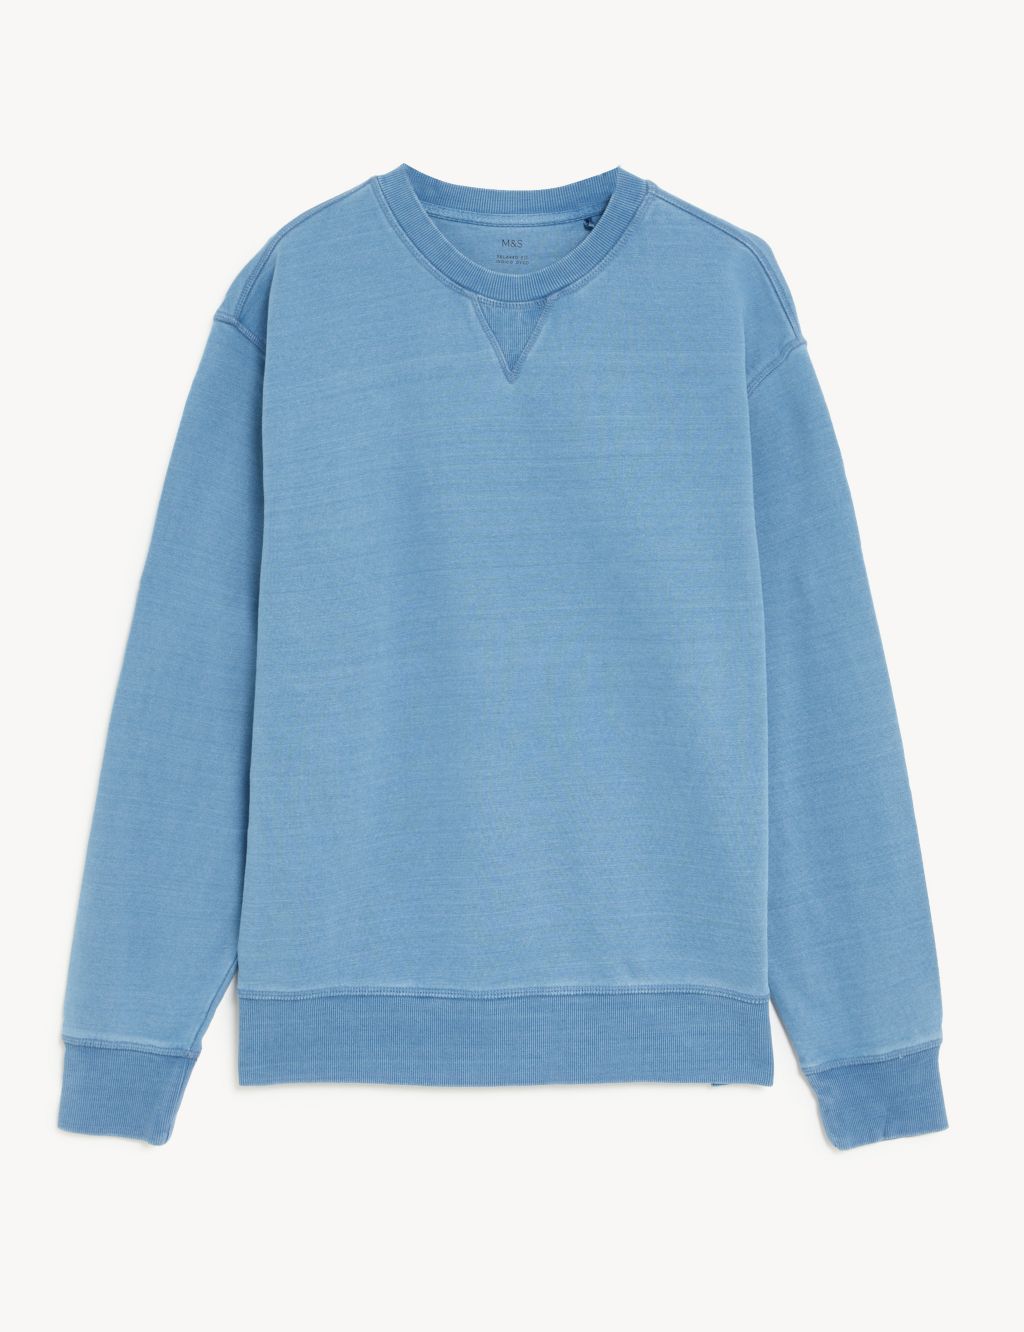 Relaxed Fit Pure Cotton Sweatshirt image 2